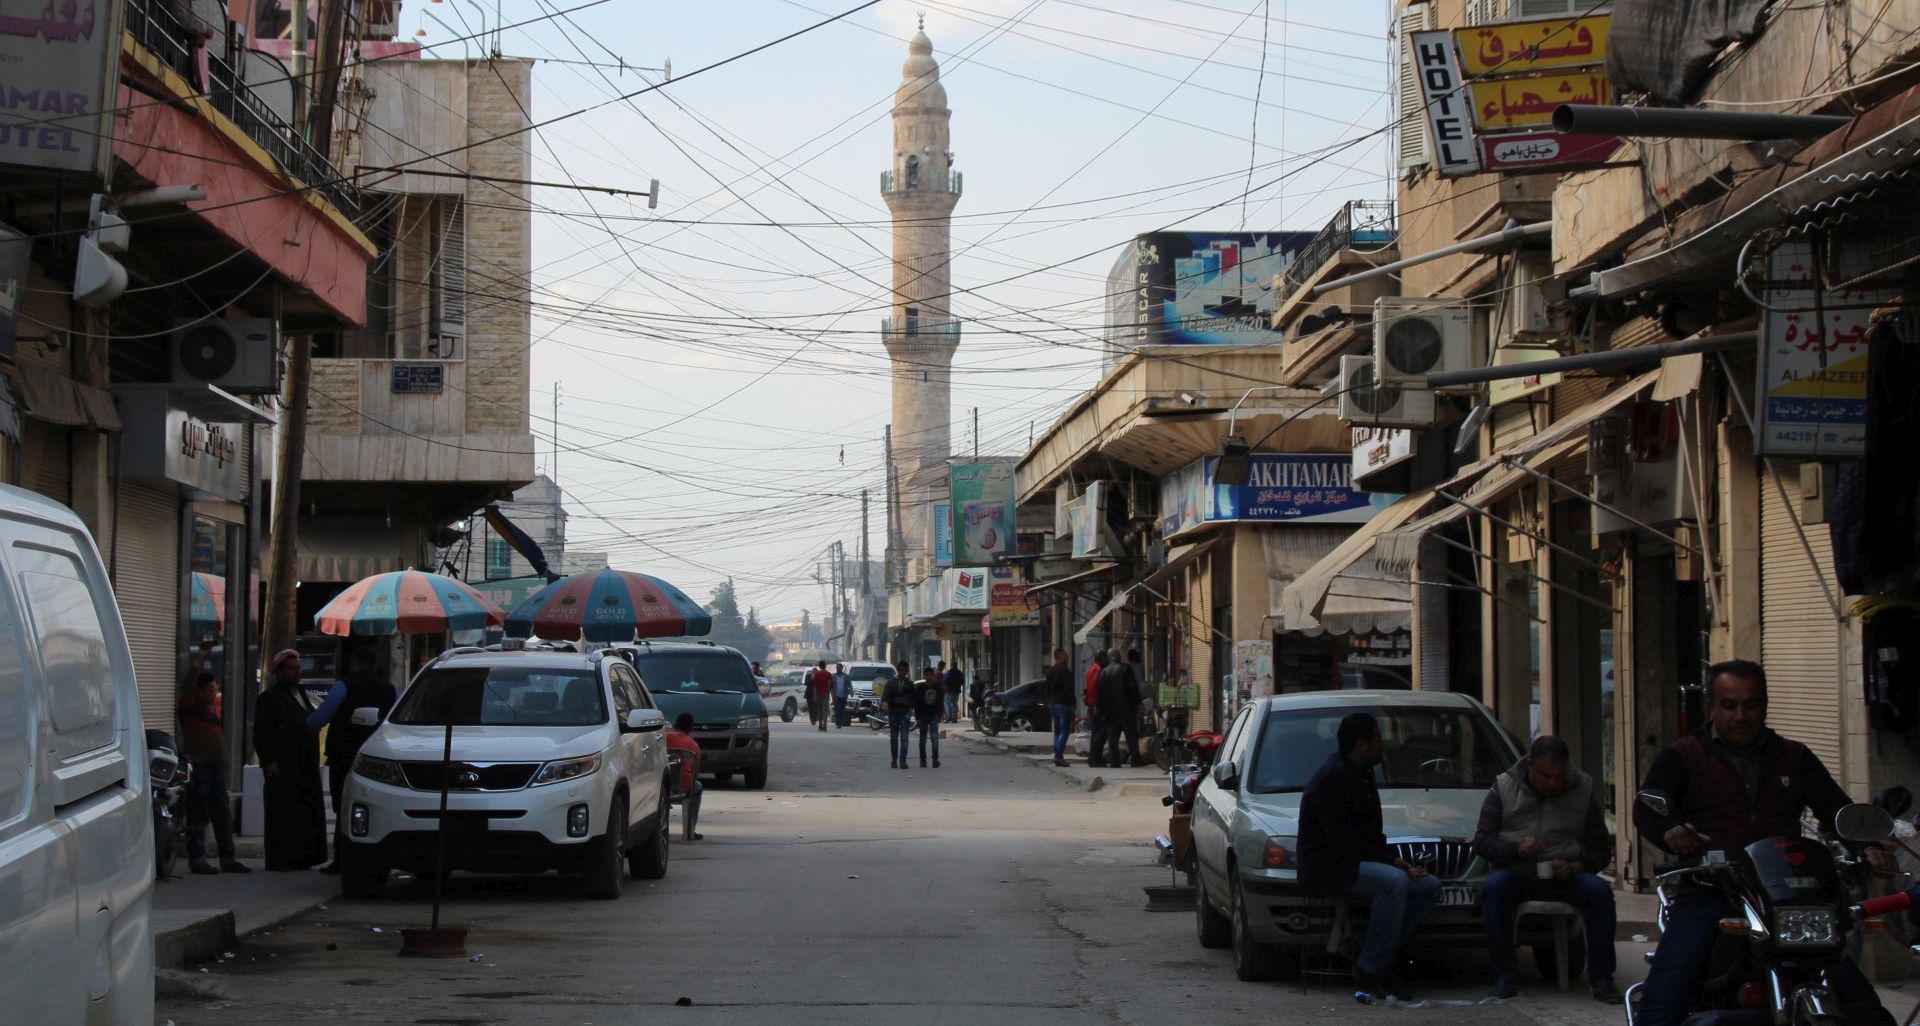 epa05875808 People in the streets of Al -Qamishli, the Kurdish region in the Aleppo Governorate in northern Syria, 28 March 2017. US and coalition military forces continued to attack the Islamic State (IS) of Iraq and Syria, conducting 30 strikes consisting of 72 engagements against ISIS targets 27 March 2017, Combined Joint Task Force Operation Inherent Resolve officials reported on 28 March 2017.  EPA/STRINGER